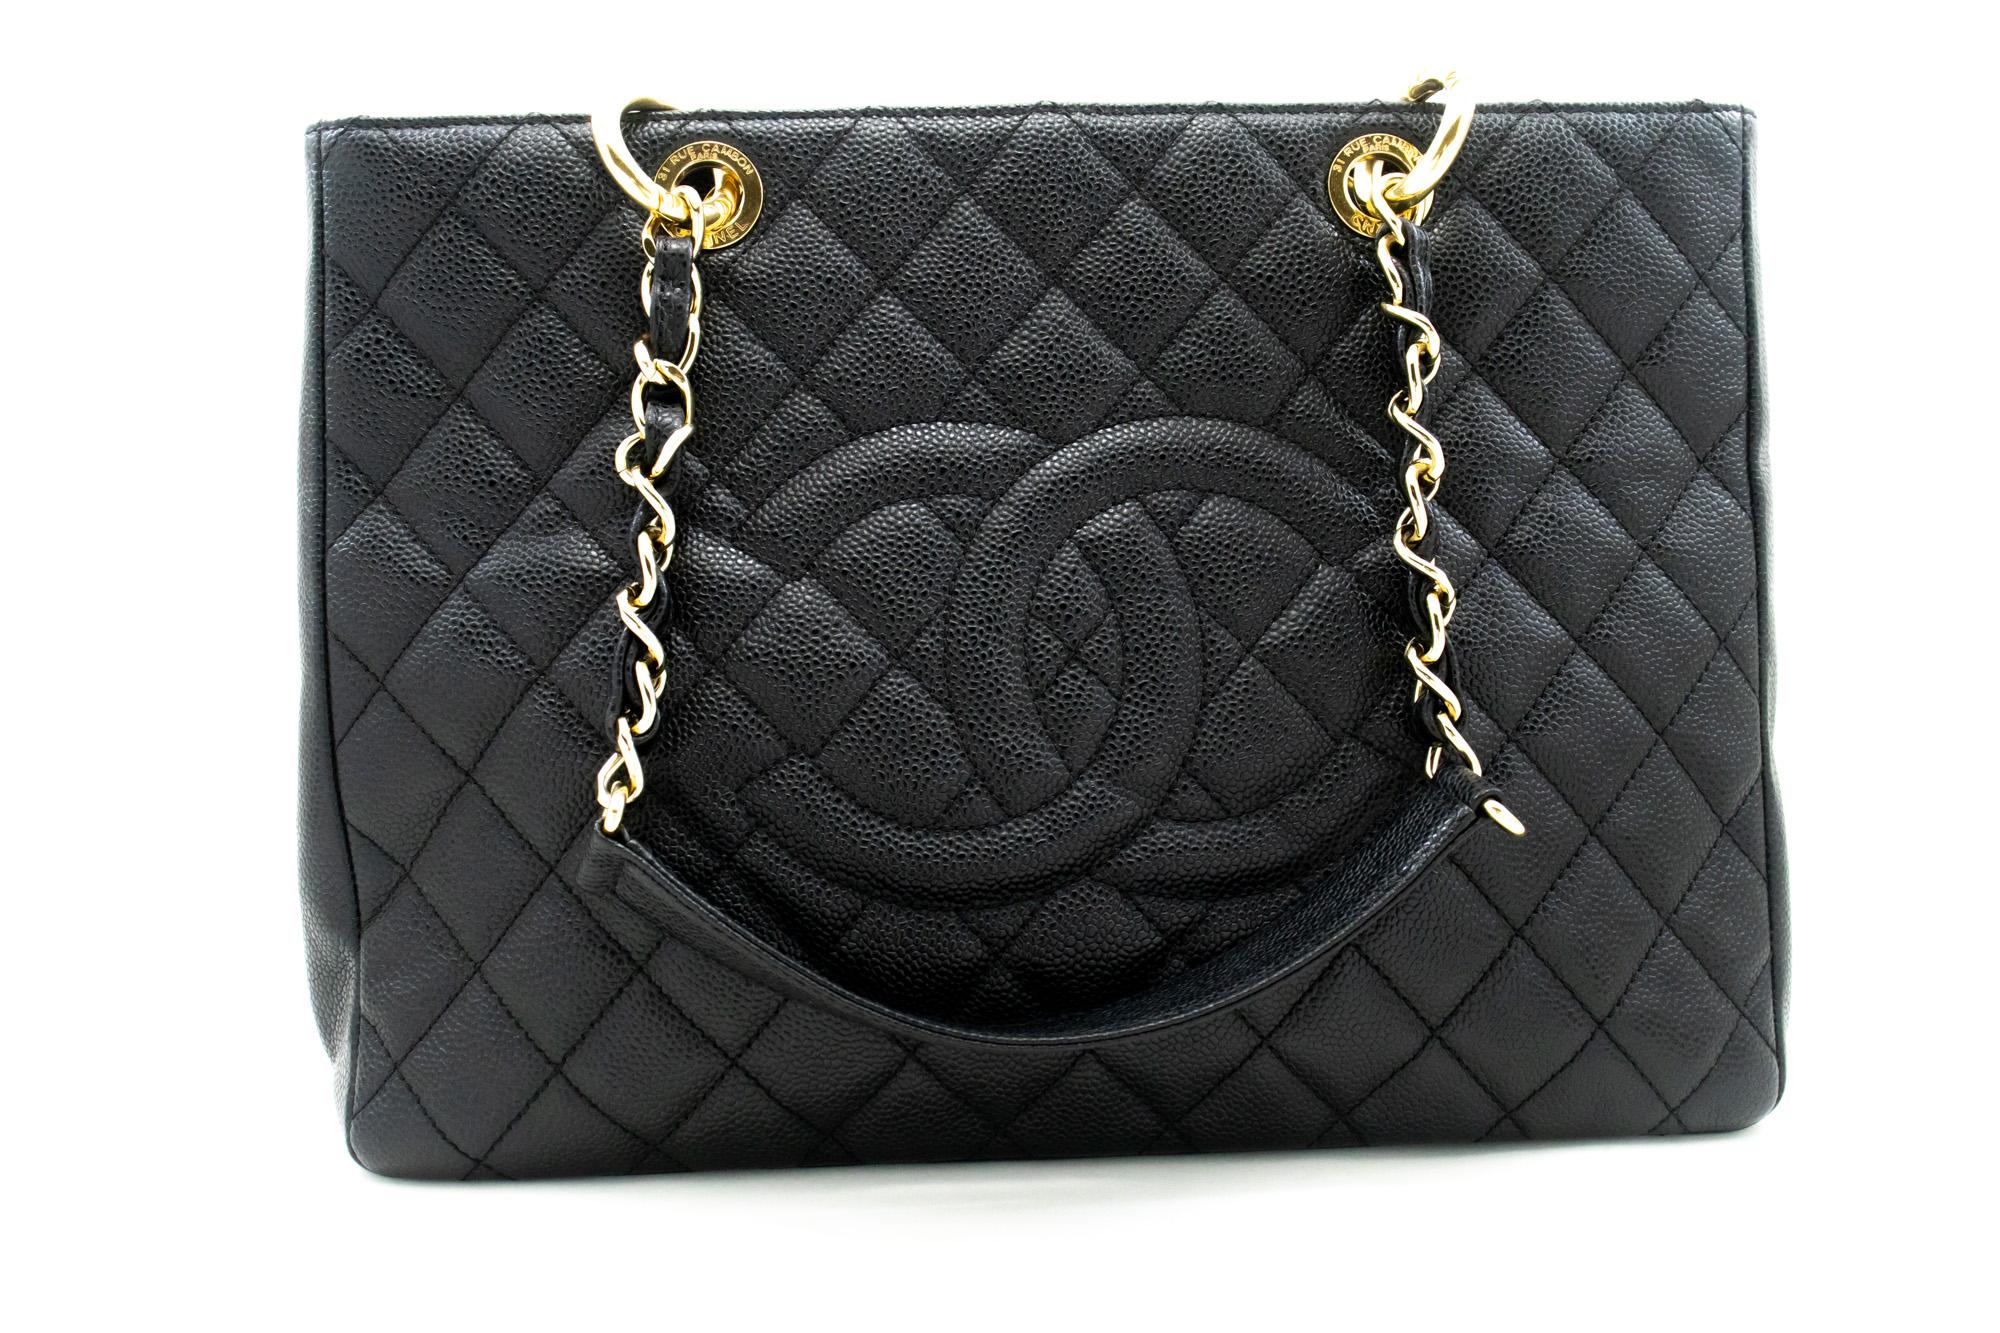 An authentic CHANEL Caviar GST 13